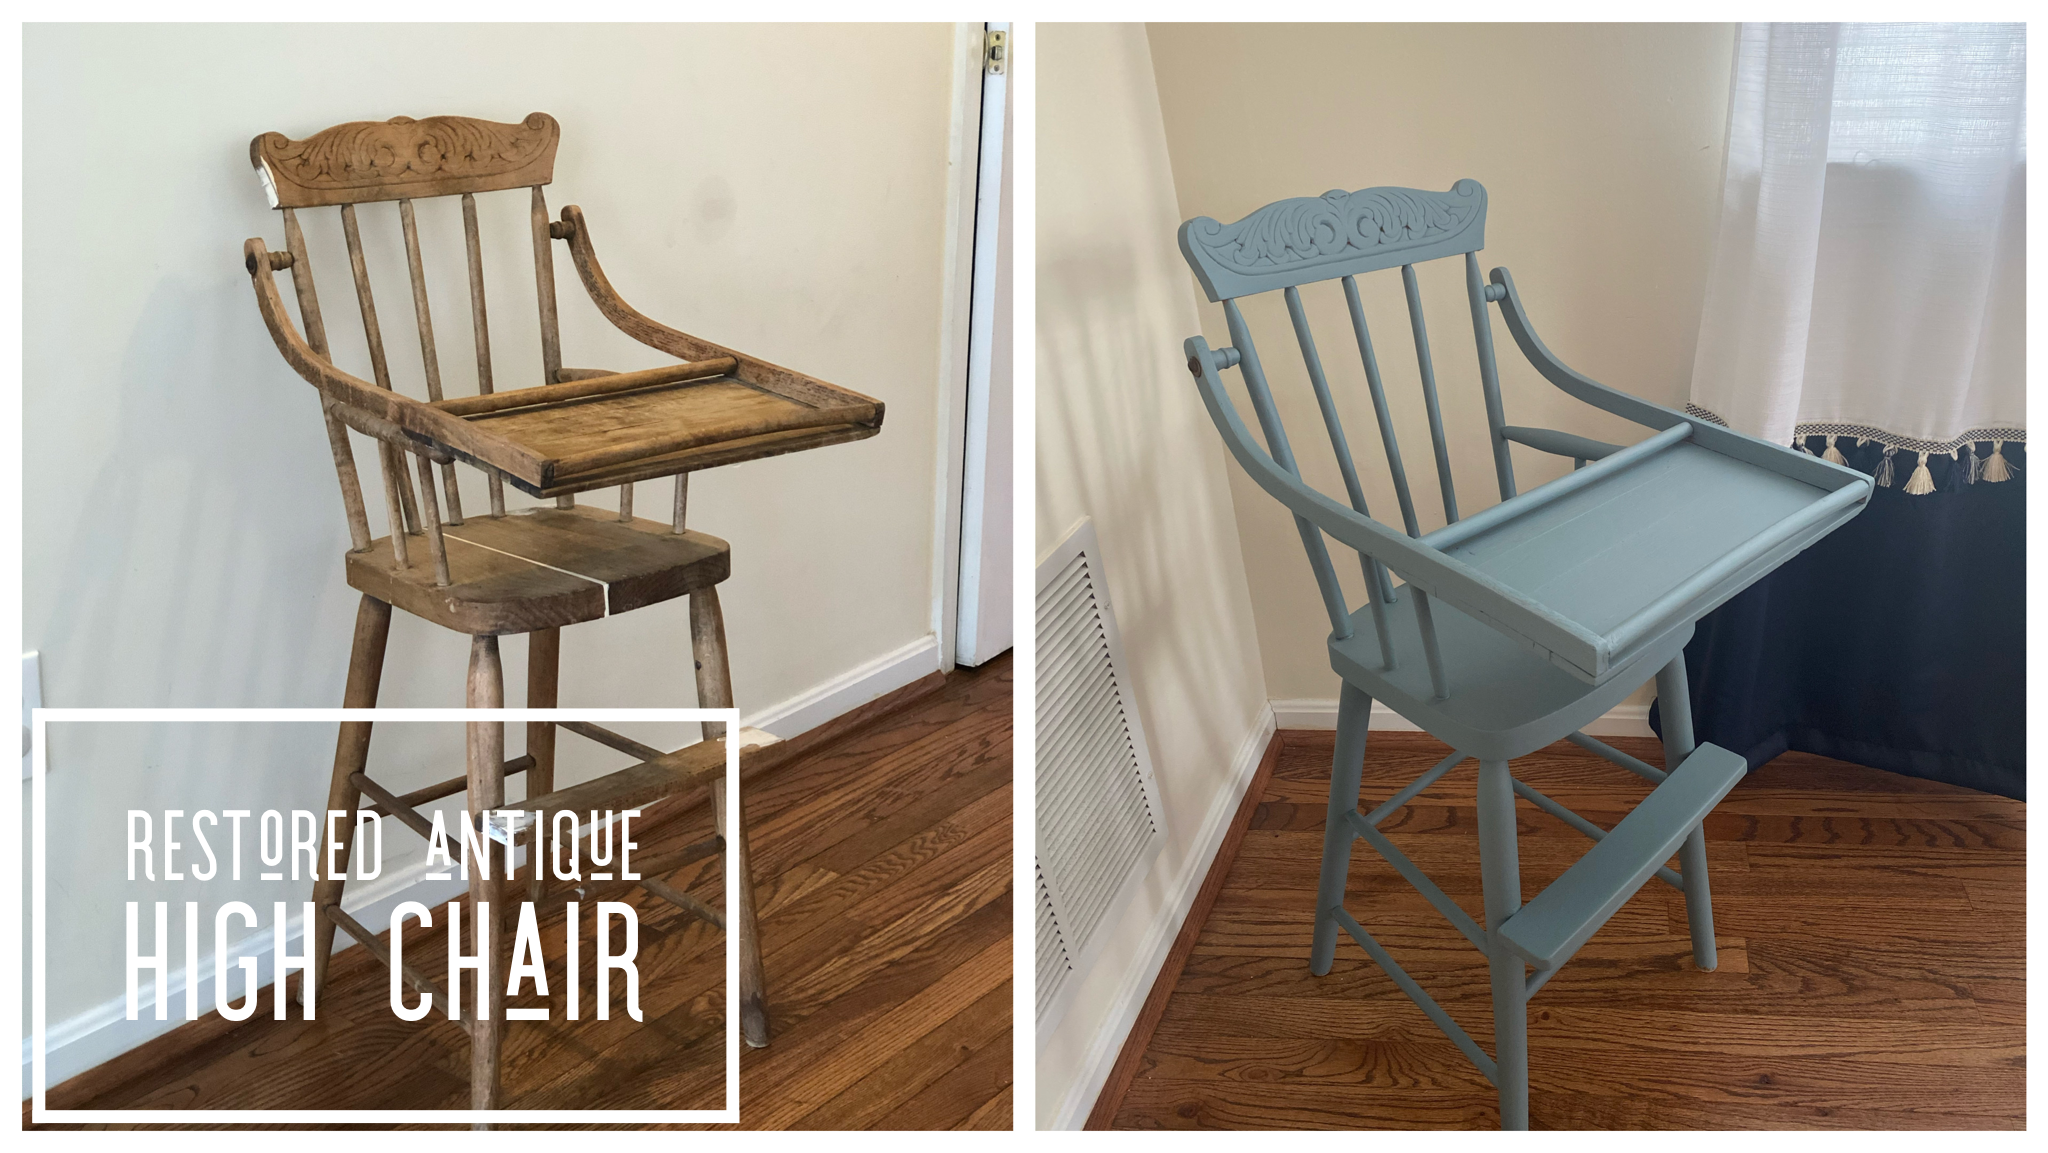 Upcycling an Antique Highchair